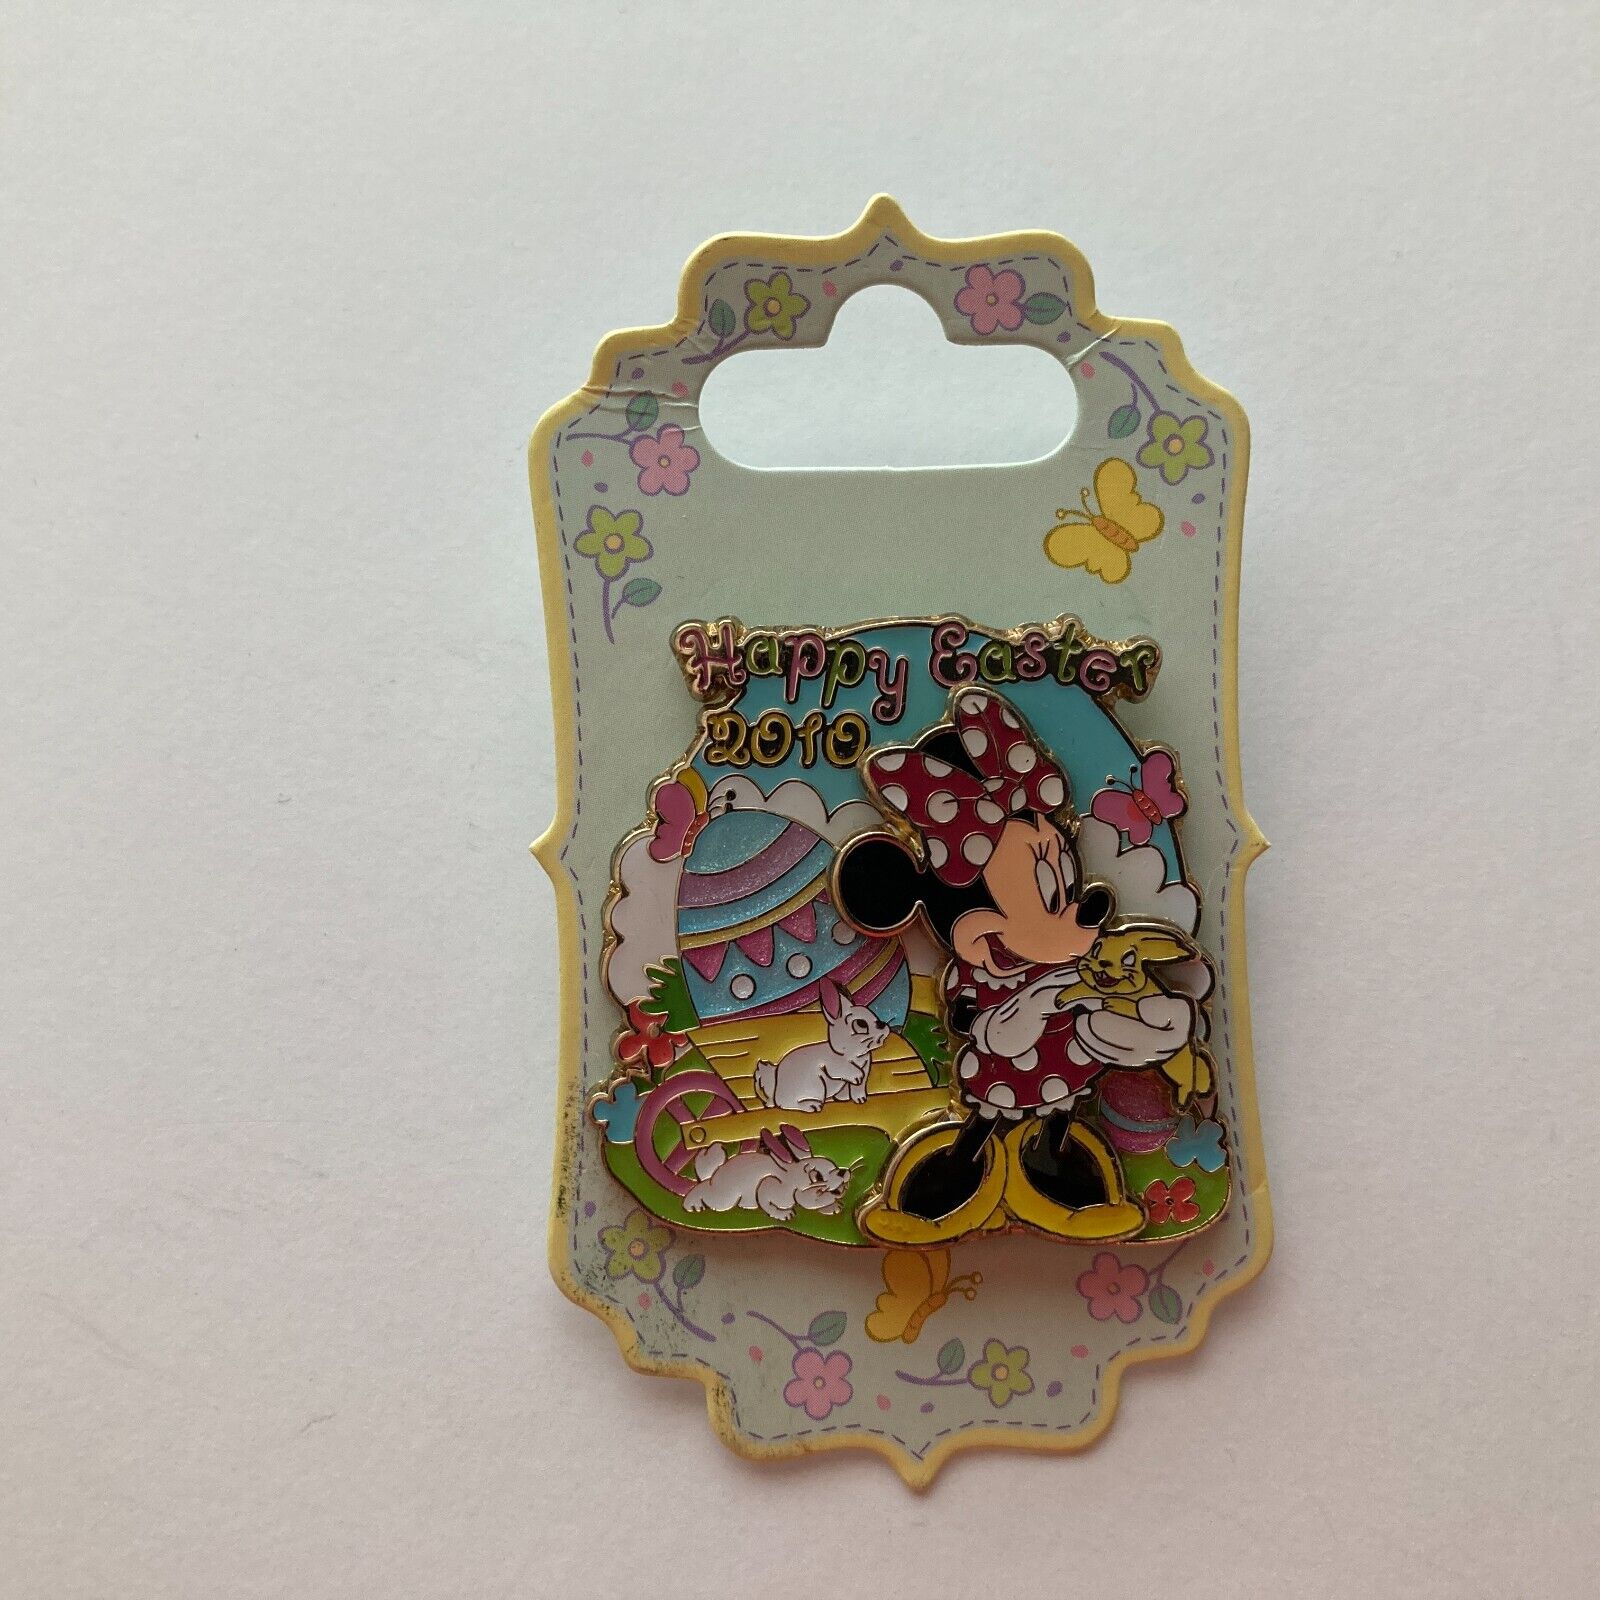 Happy Easter 2010 Series - Minnie Mouse Disney Pin 75865